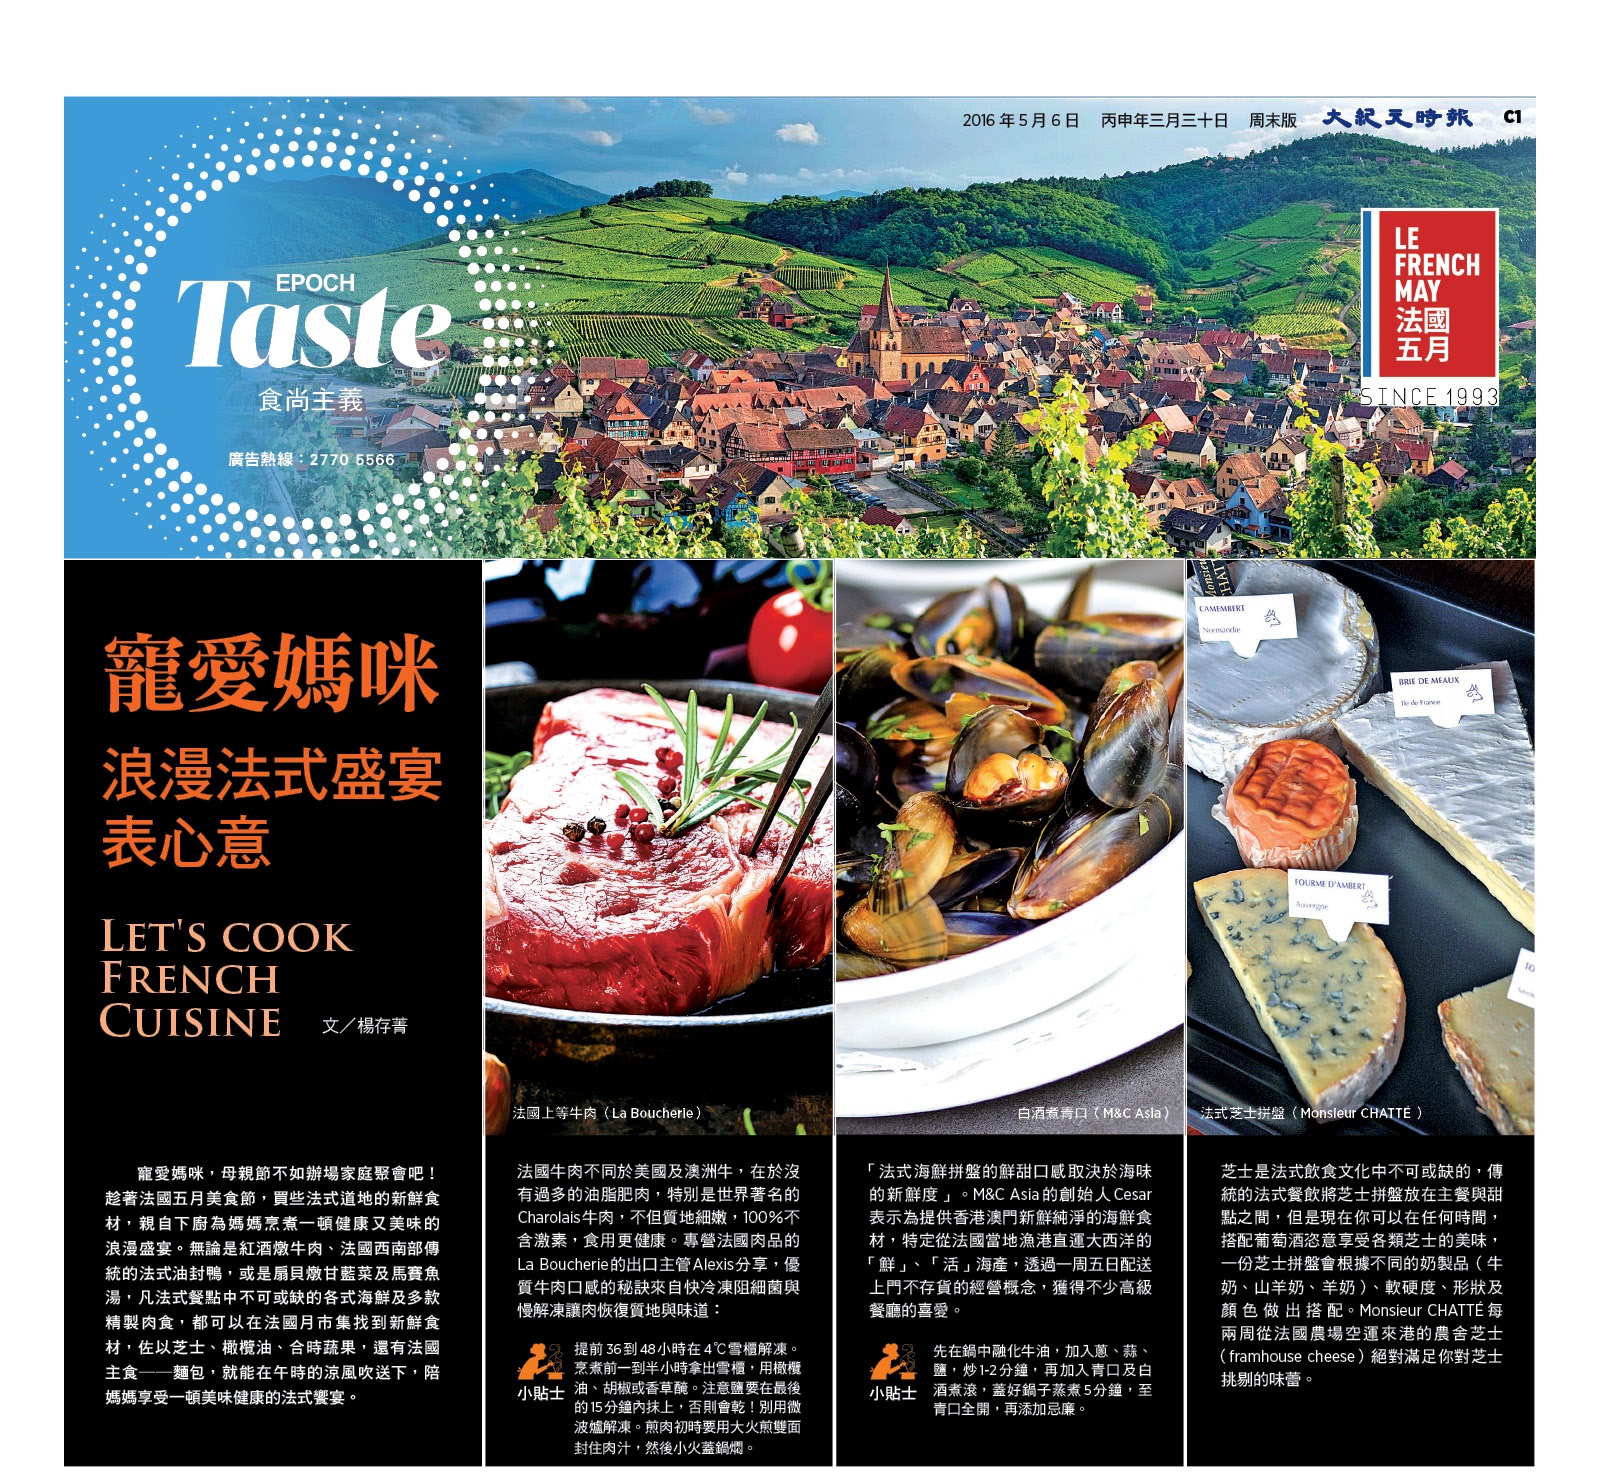 M&C Asia Seafood The Epoch Times - May 2016